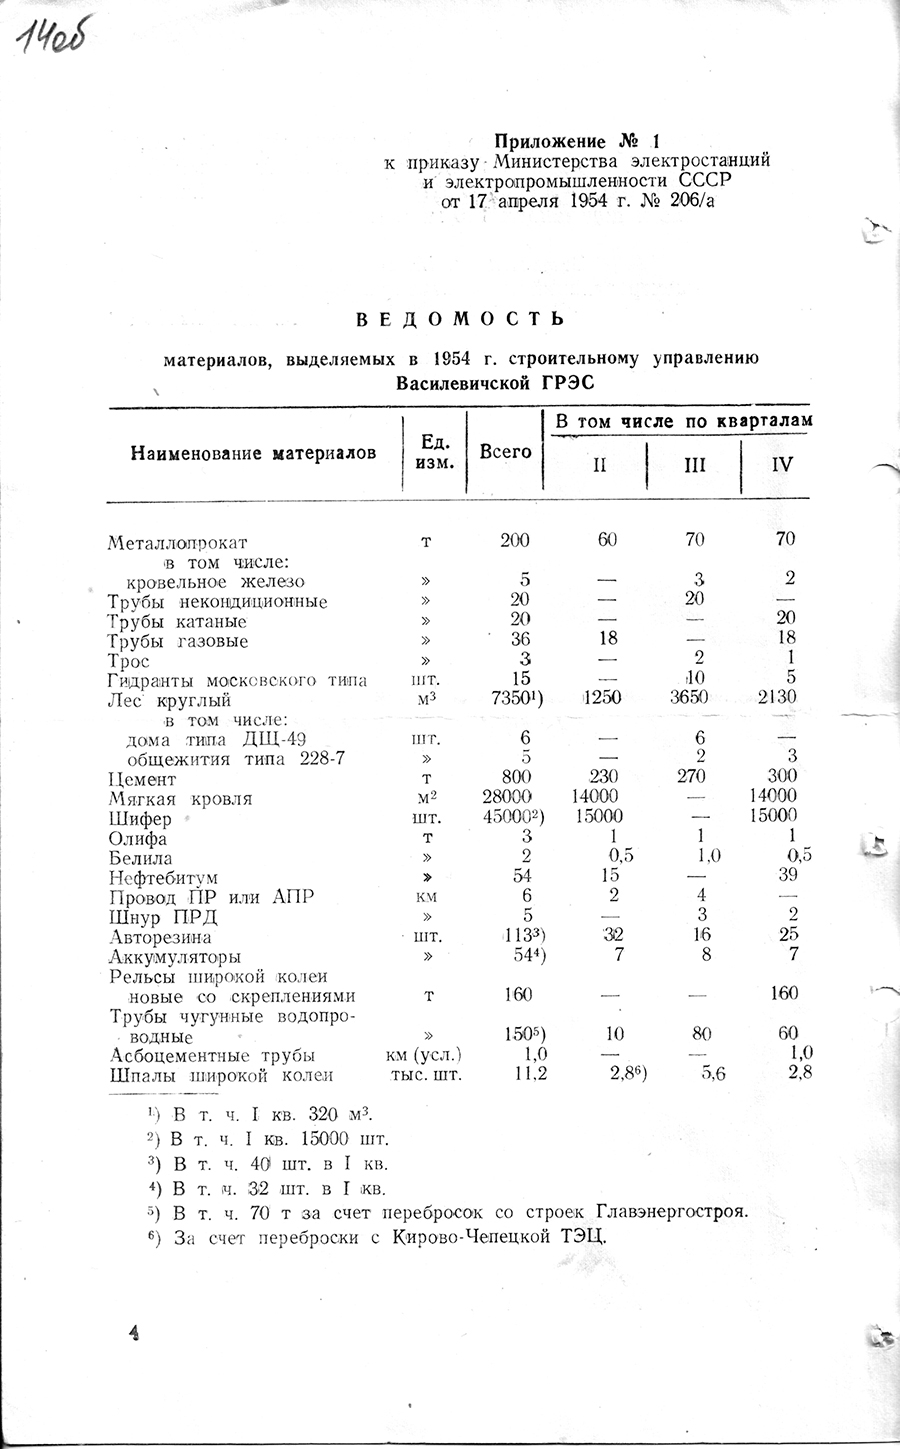 Order No. 206/A of the Ministry of Power Plants and Electric Medications of the USSR on the forcing of the construction of the Vasilevichi State District Power Plant-стр. 3